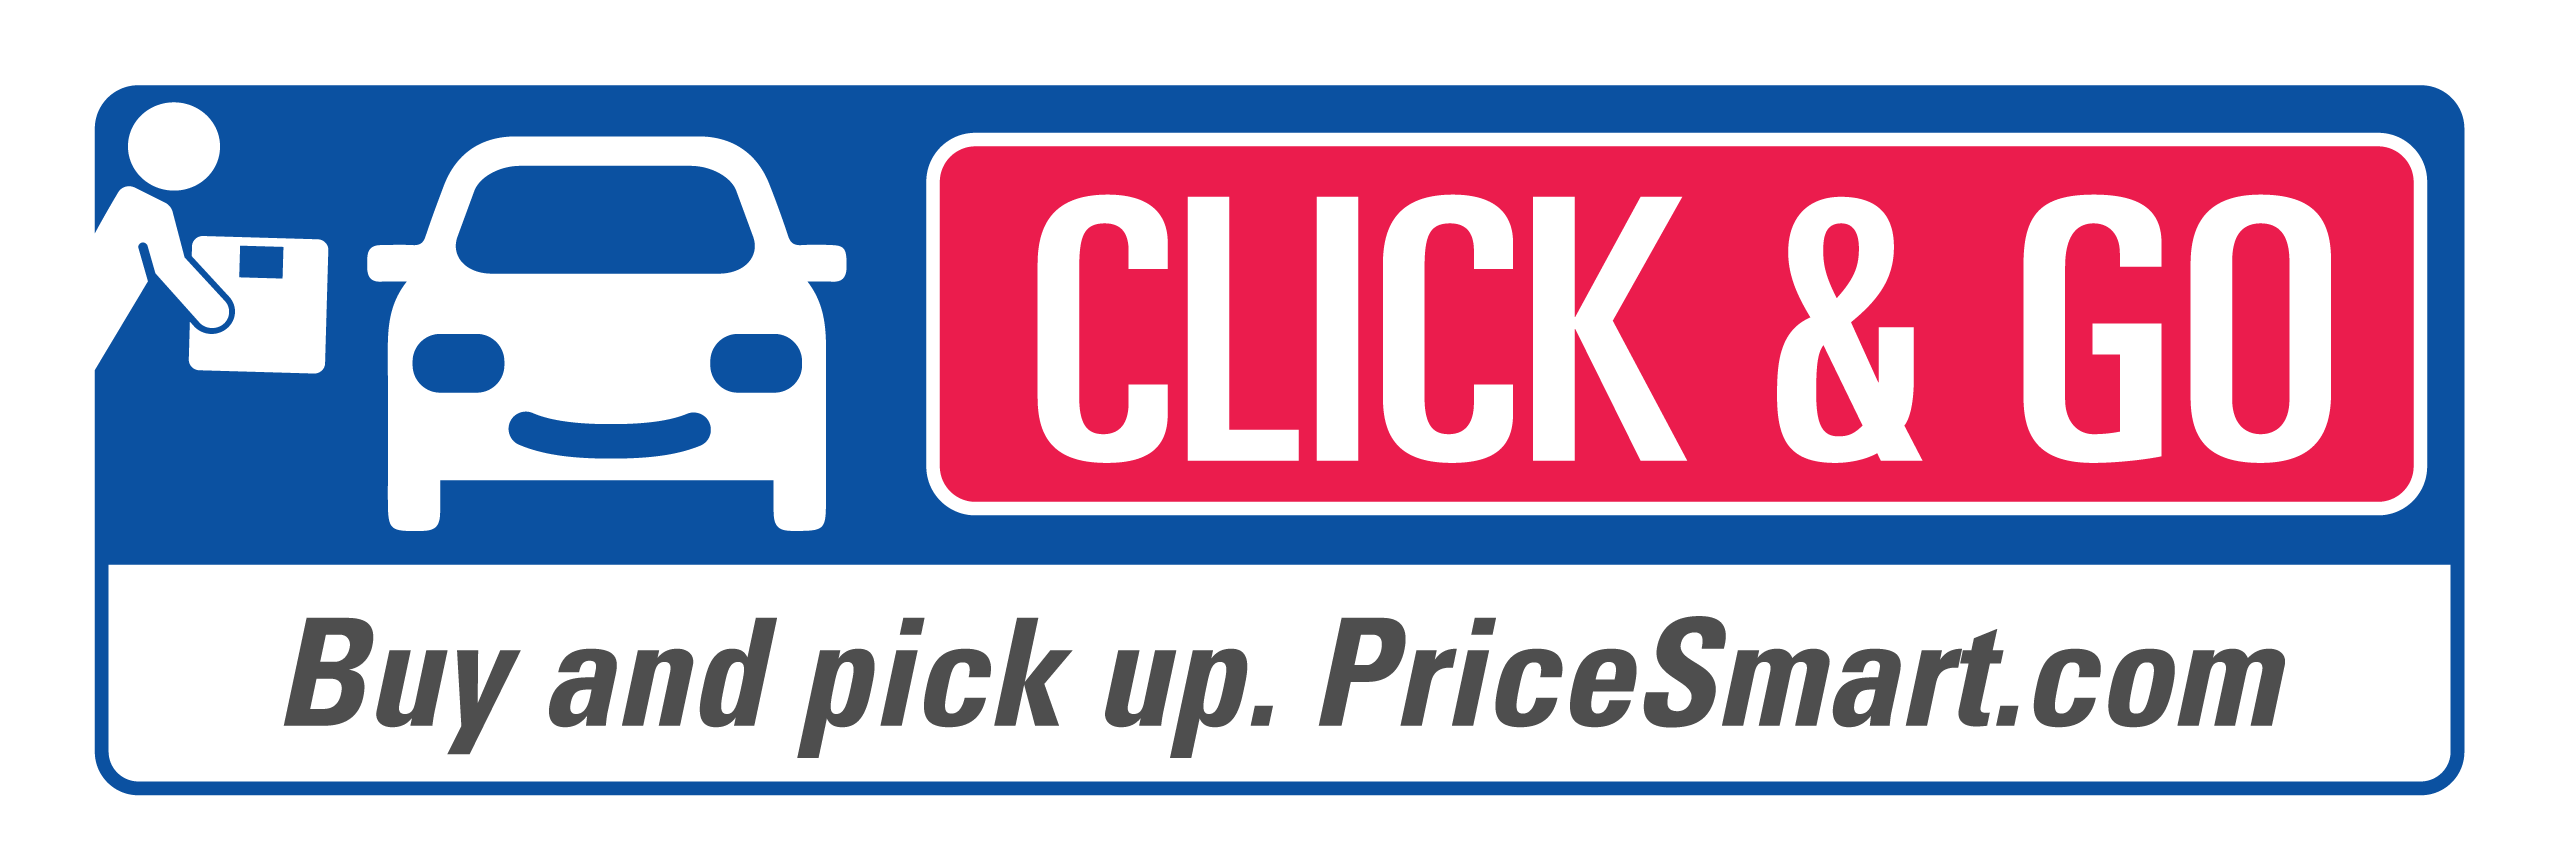 Transparent Pricesmart Logo - Wallpaper Images Android PC HD